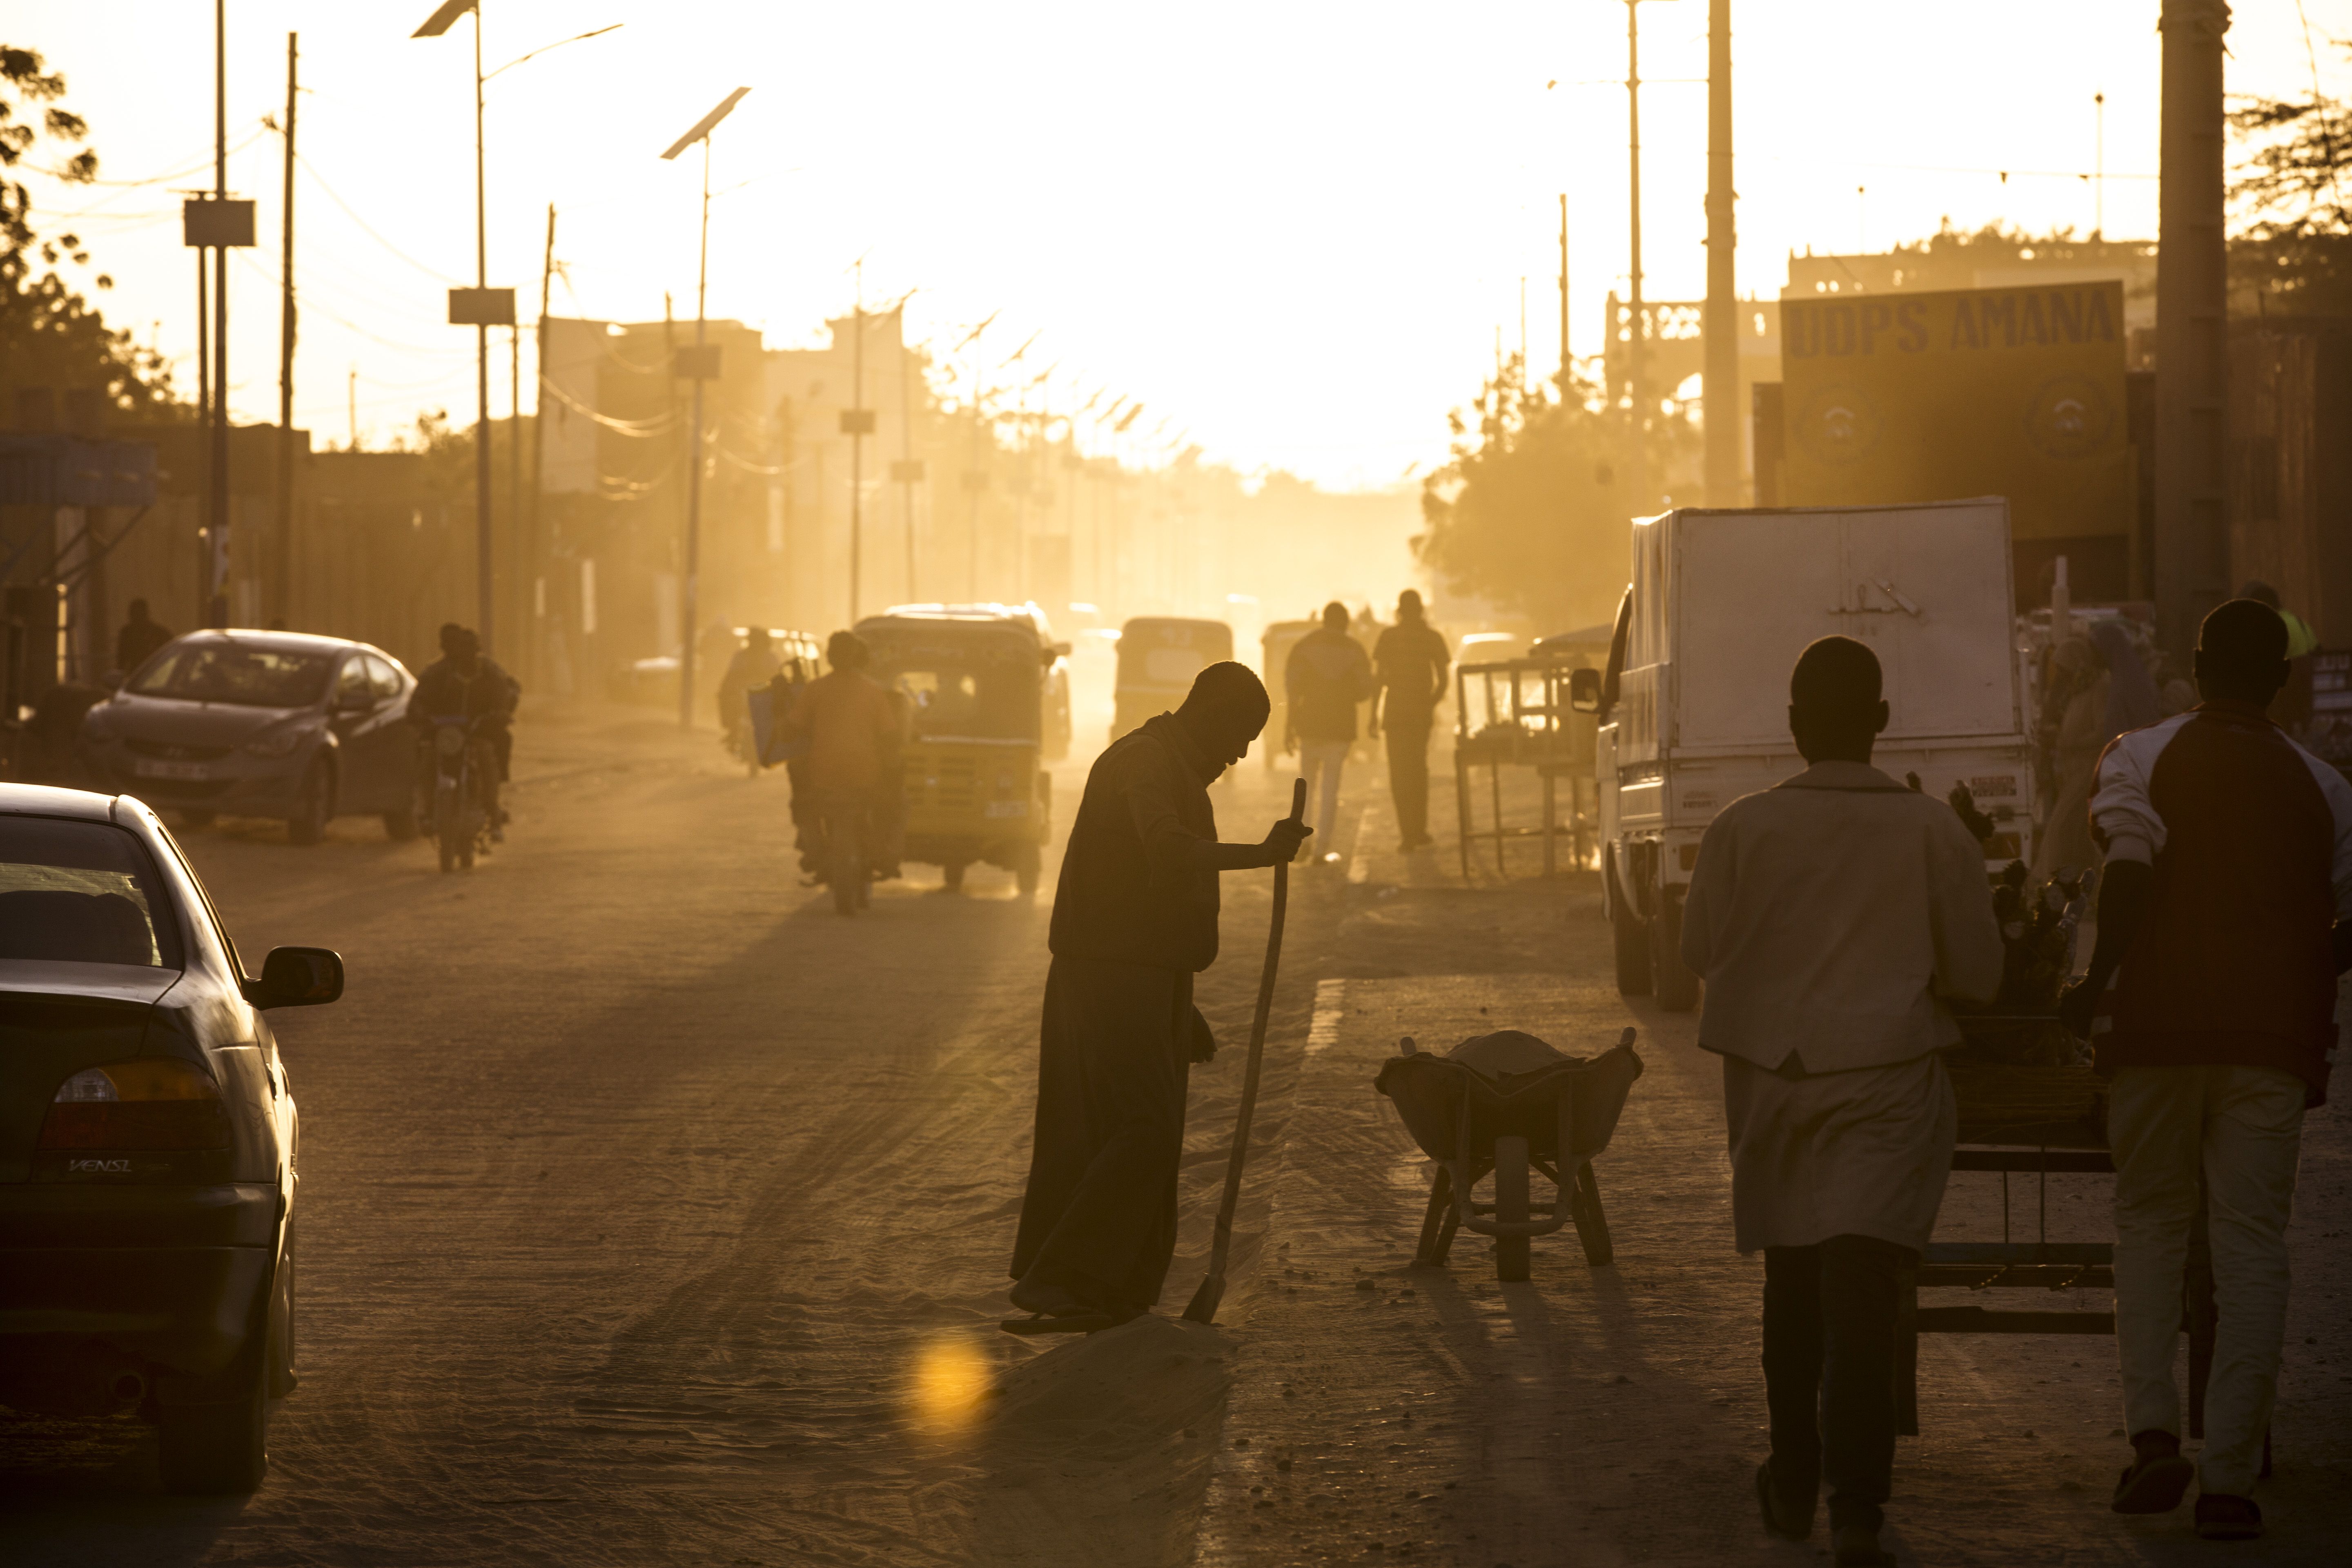 A man sweeps dust off the street at dusk in Agadez, Niger, January 16, 2018. Image by Joe Penney. Niger, 2018.